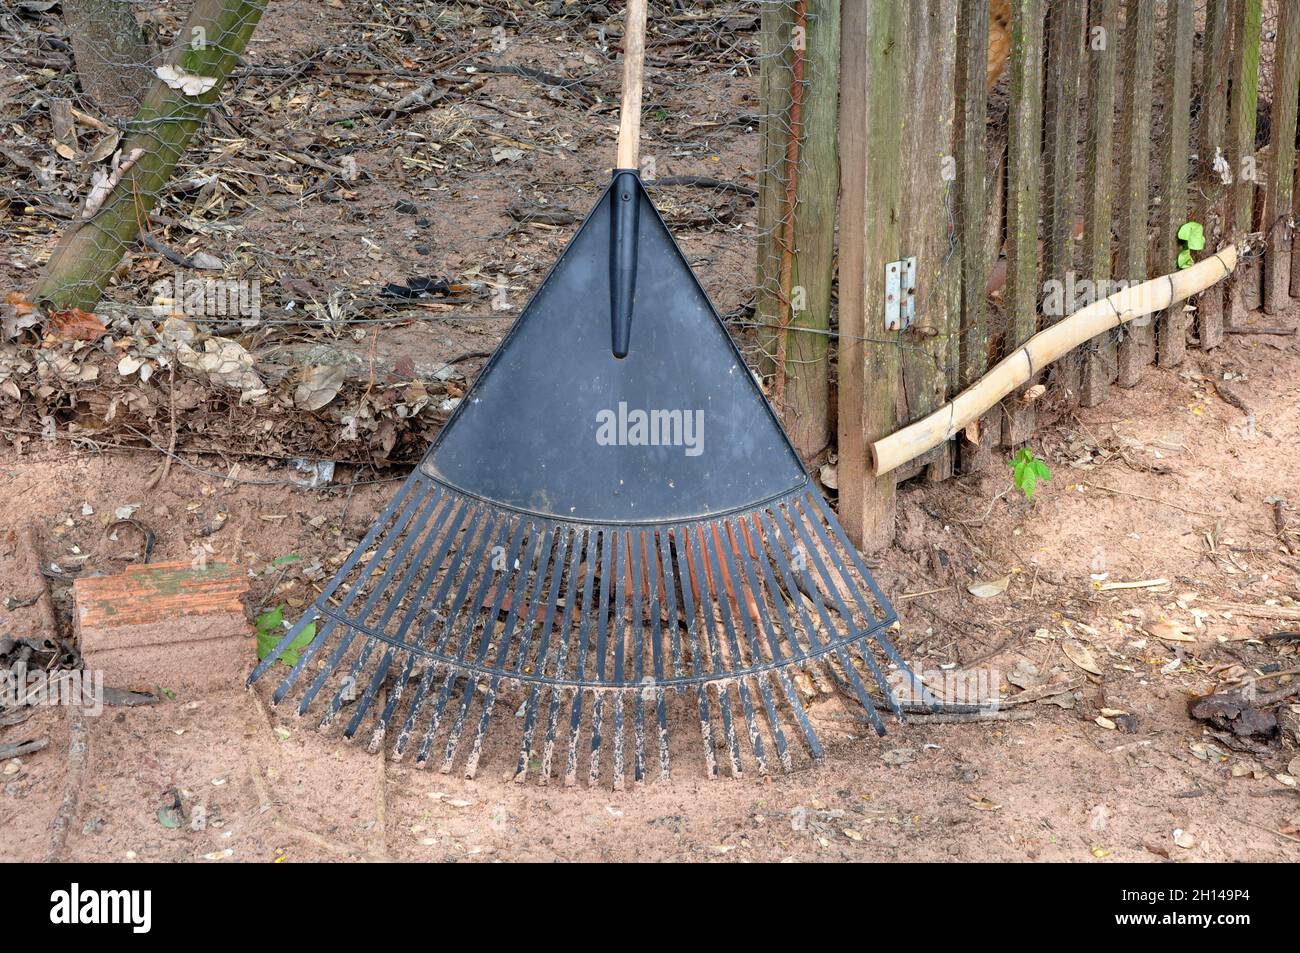 Rake, iron instrument used for clearing land in farms and farms, with a wooden handle, earthen floor in the background, wire fence and wood, Brazil, S Stock Photo